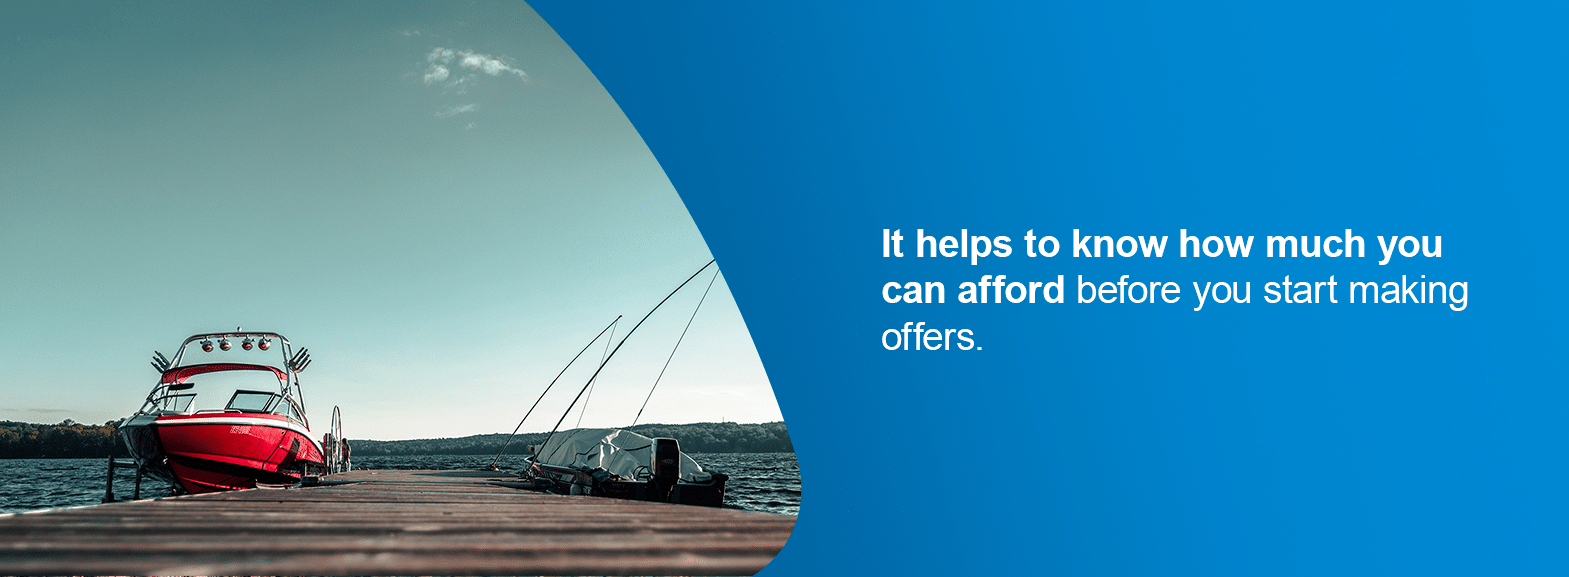 How to Buy a Used Boat. It helps to know how much you can afford before you start making offers.